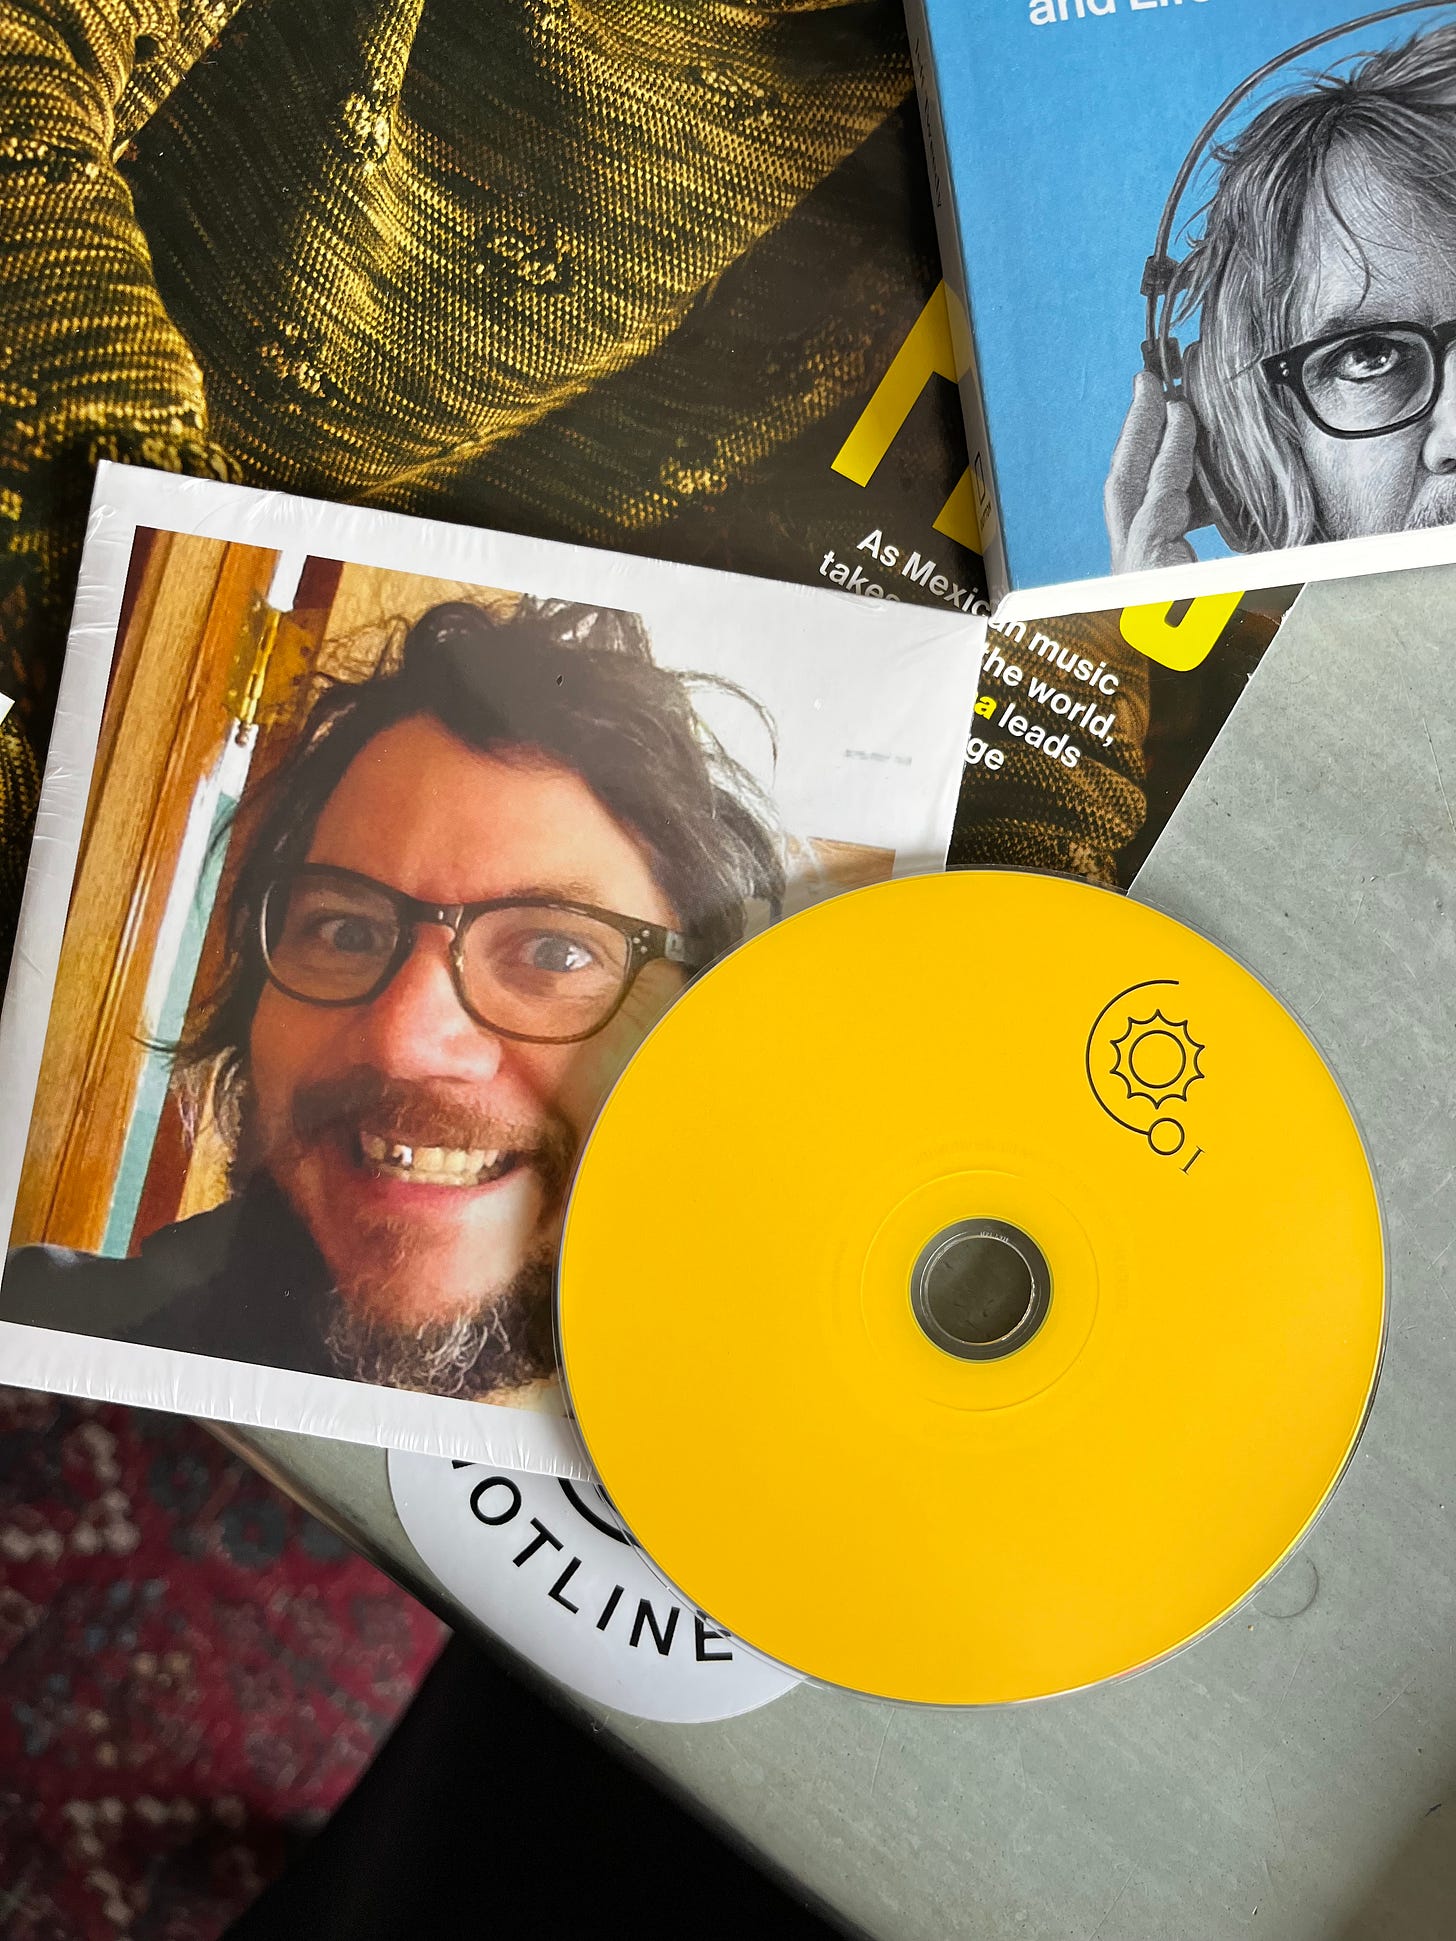 A Starship Casual CD, a yellow disc sitting on top of its paper sleeve, on a desk with a book and magazine nearby. The CD sleeve features a photo of Jeff smiling with a fake gold tooth and glasses.